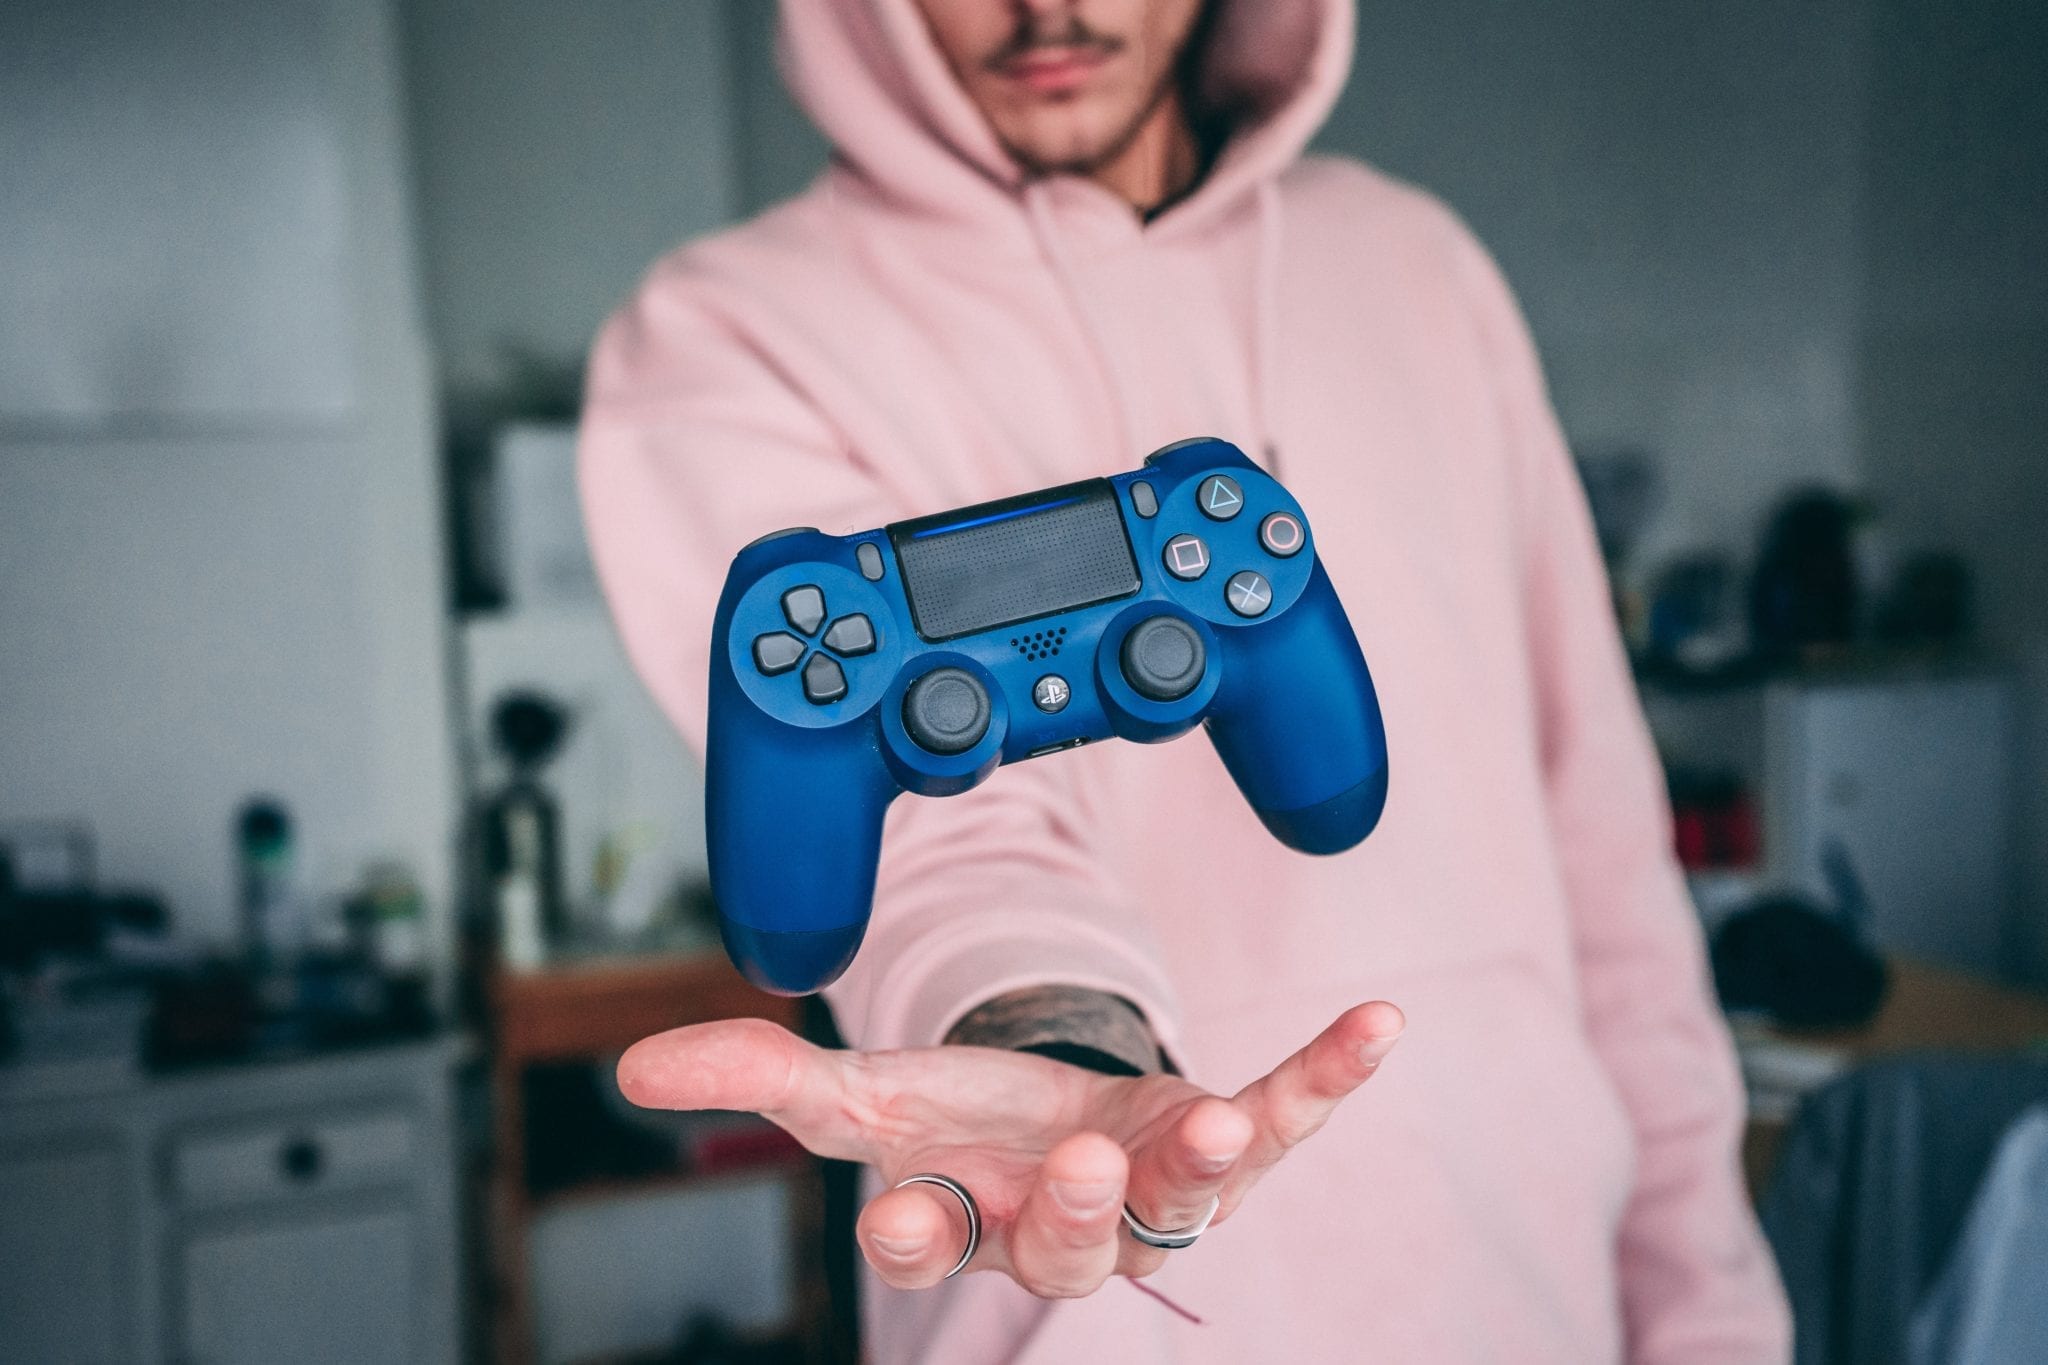 gaming represented by man holding a floating video game controller